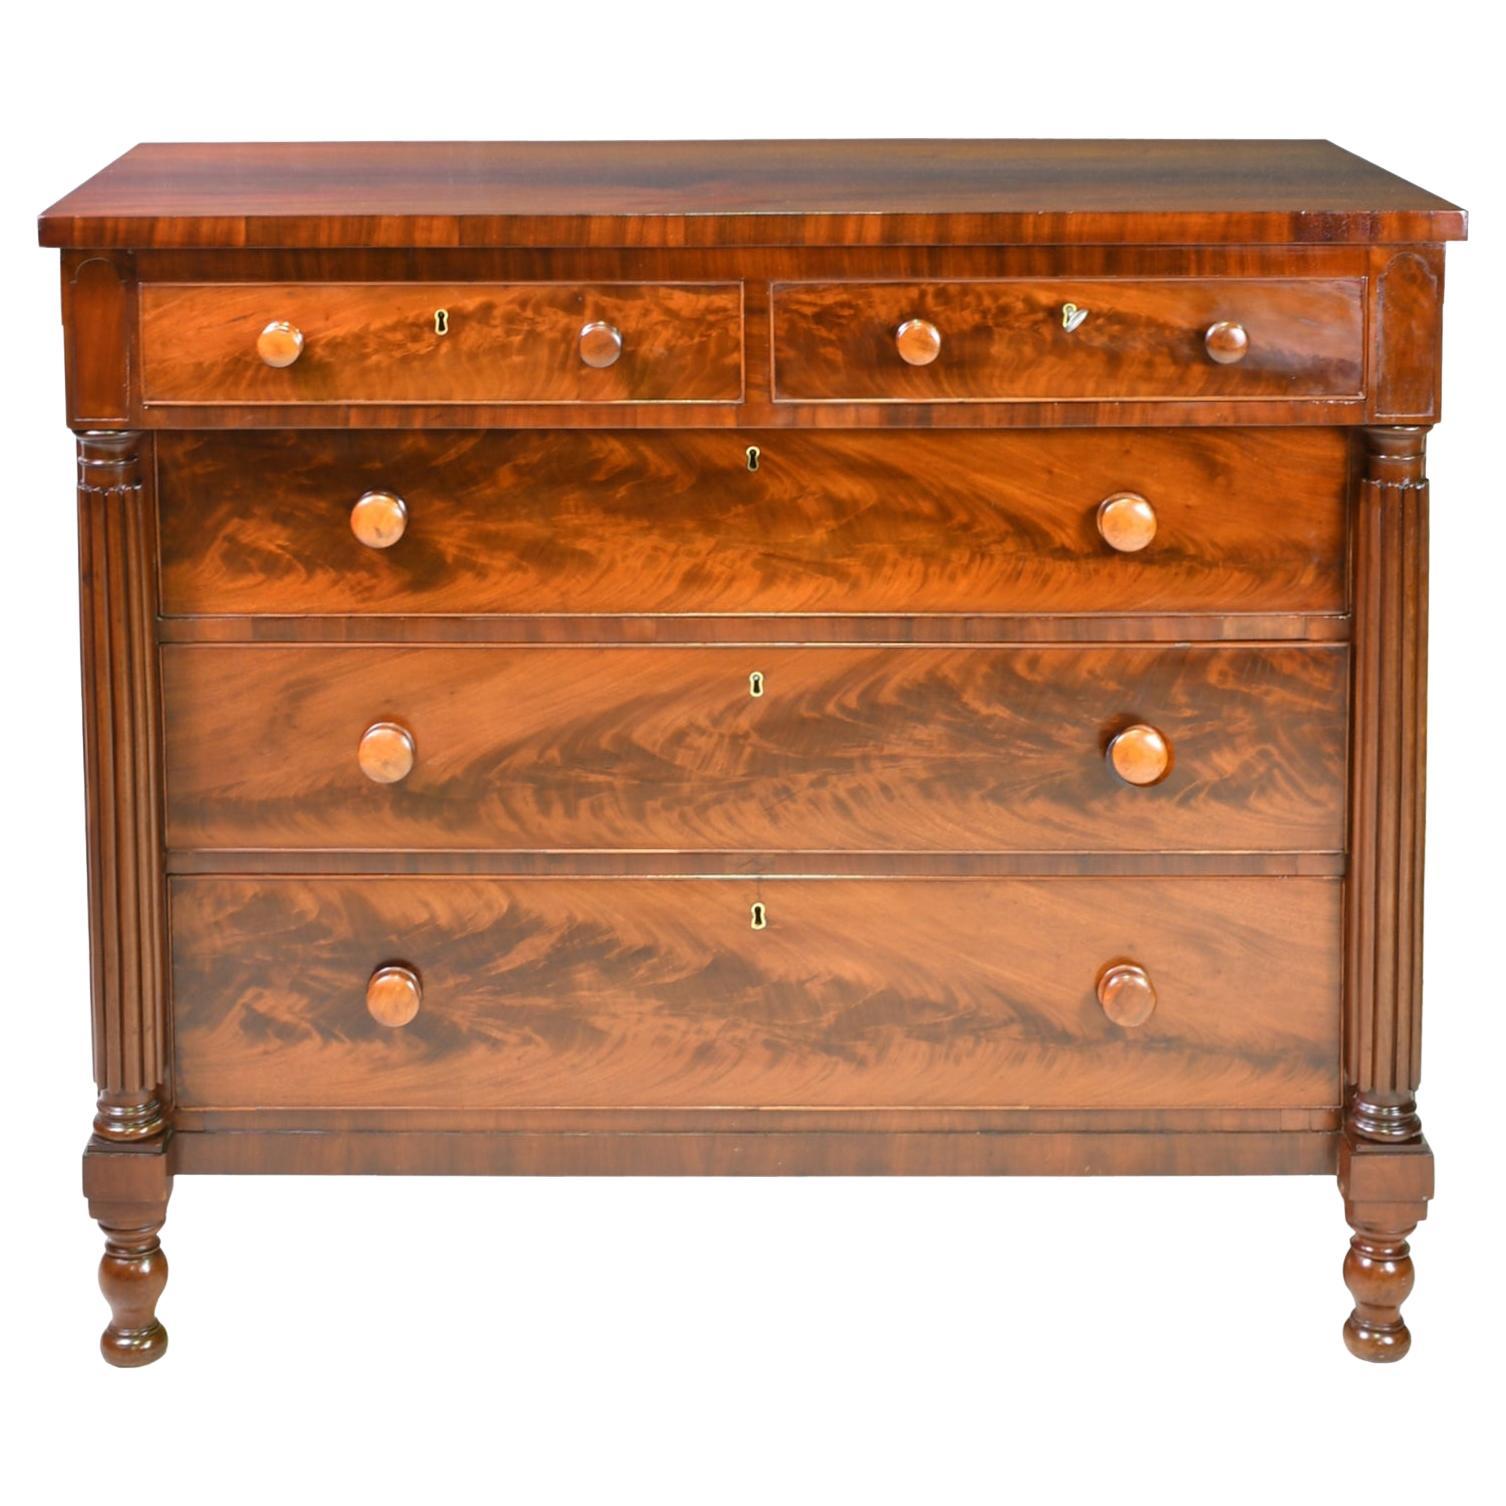 Amerikanische Federal Chest of Drawers in West Indies Mahagoni, Baltimore, um 1835